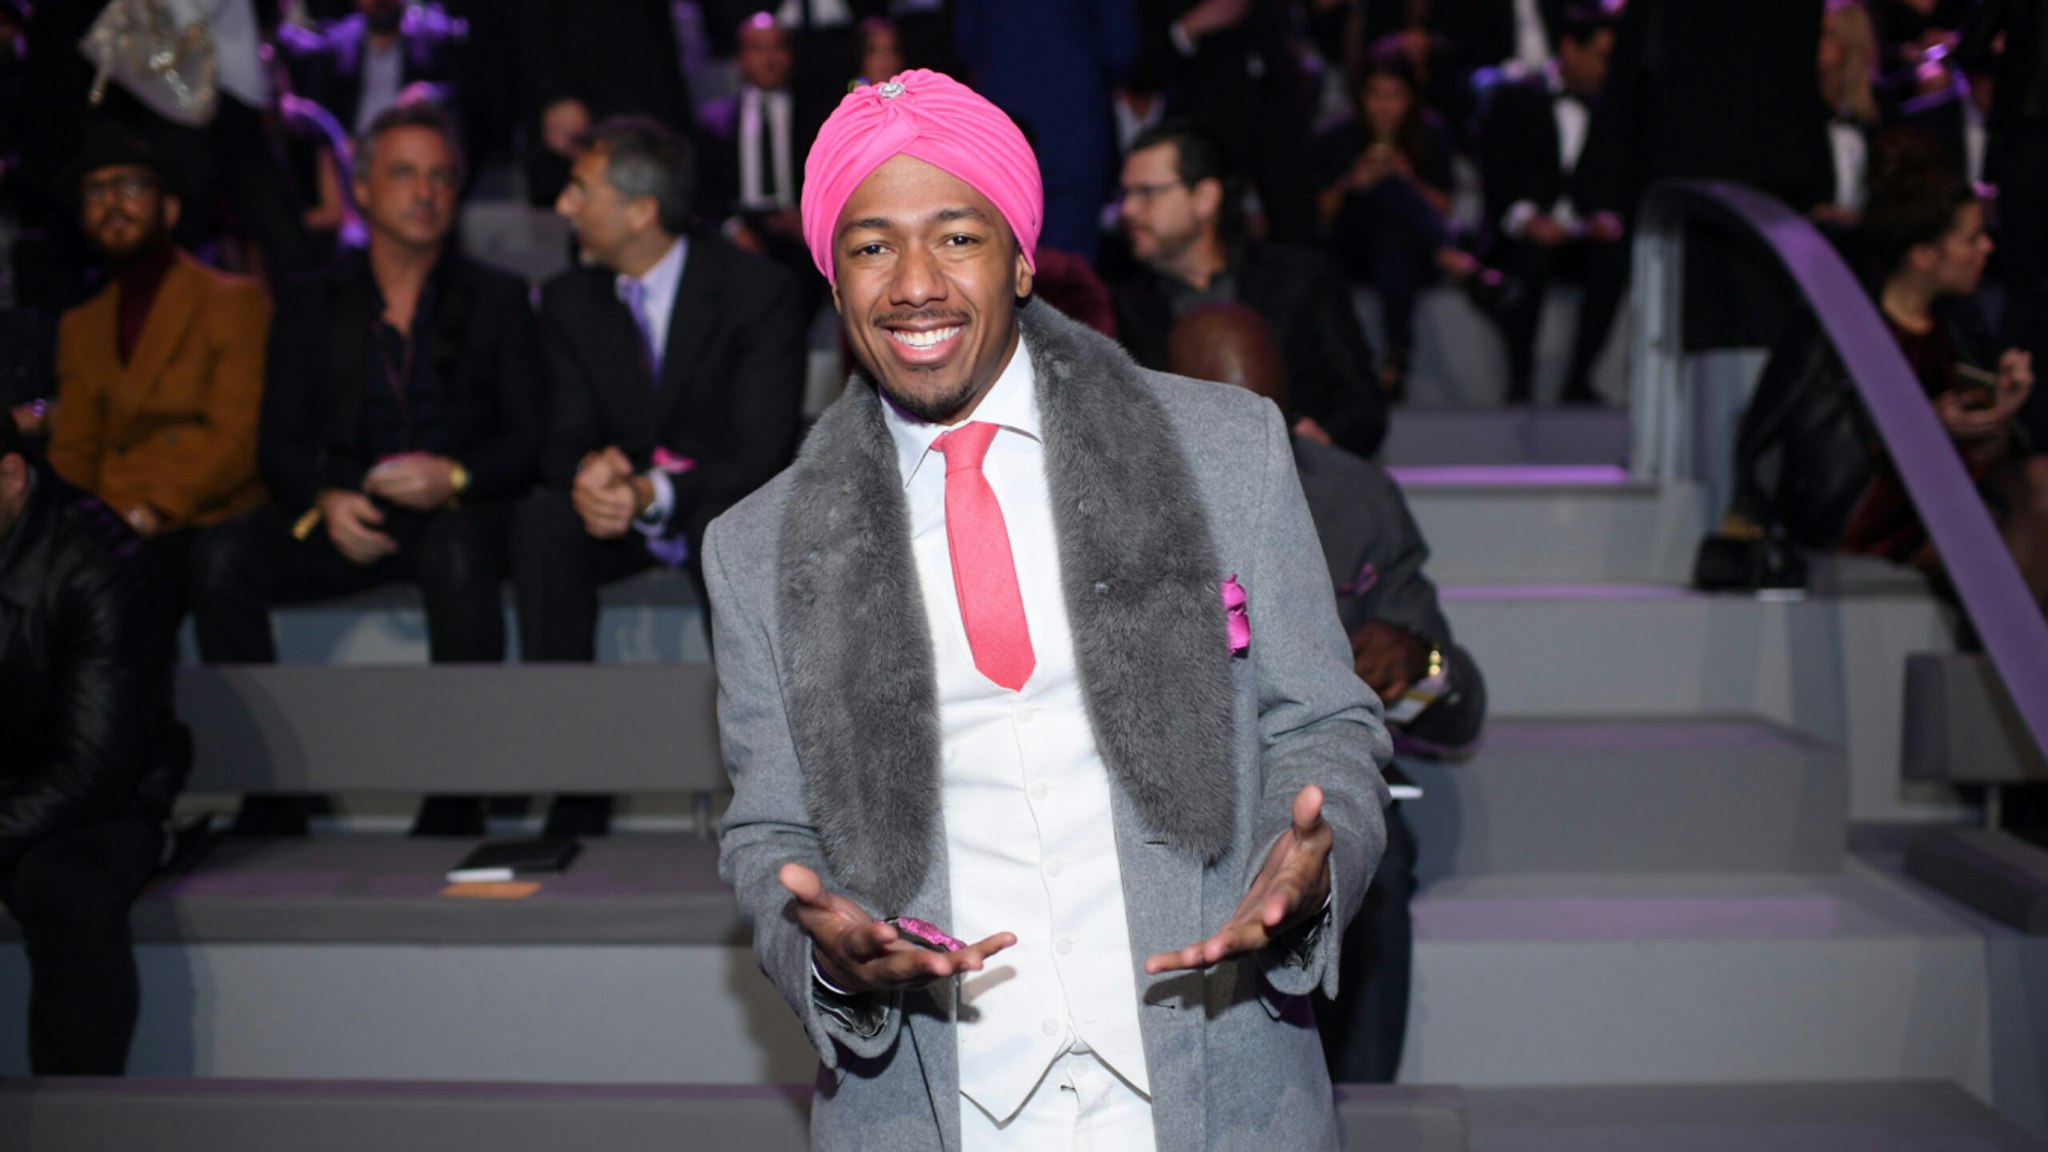 Nick Cannon attends the 2016 Victoria's Secret Fashion Show on November 30, 2016 in Paris, France.